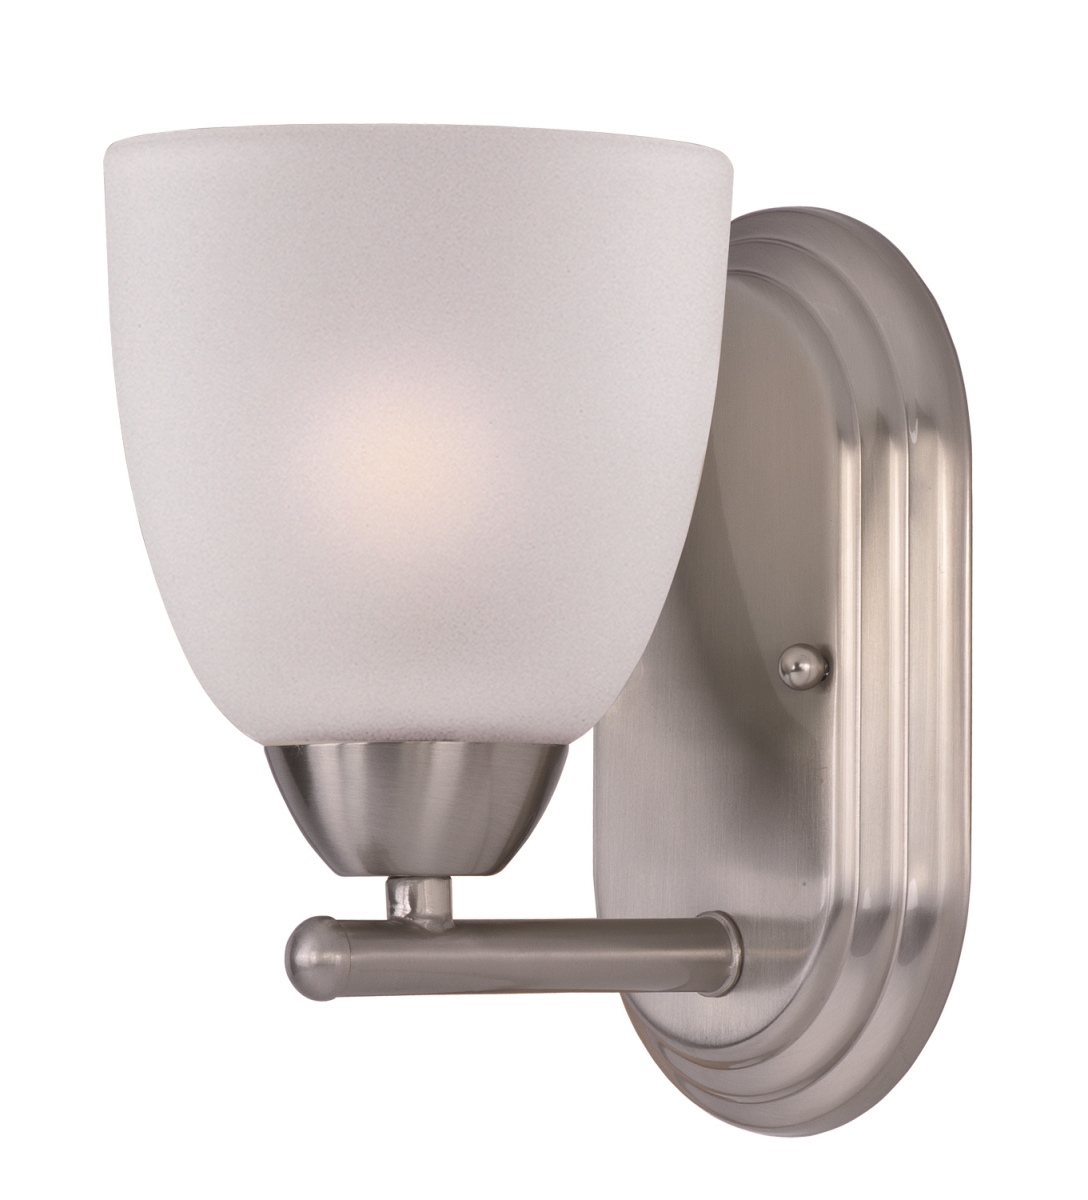 11311ftsn 8 X 5 In. Axis One Light Wall Sconce, Satin Nickel